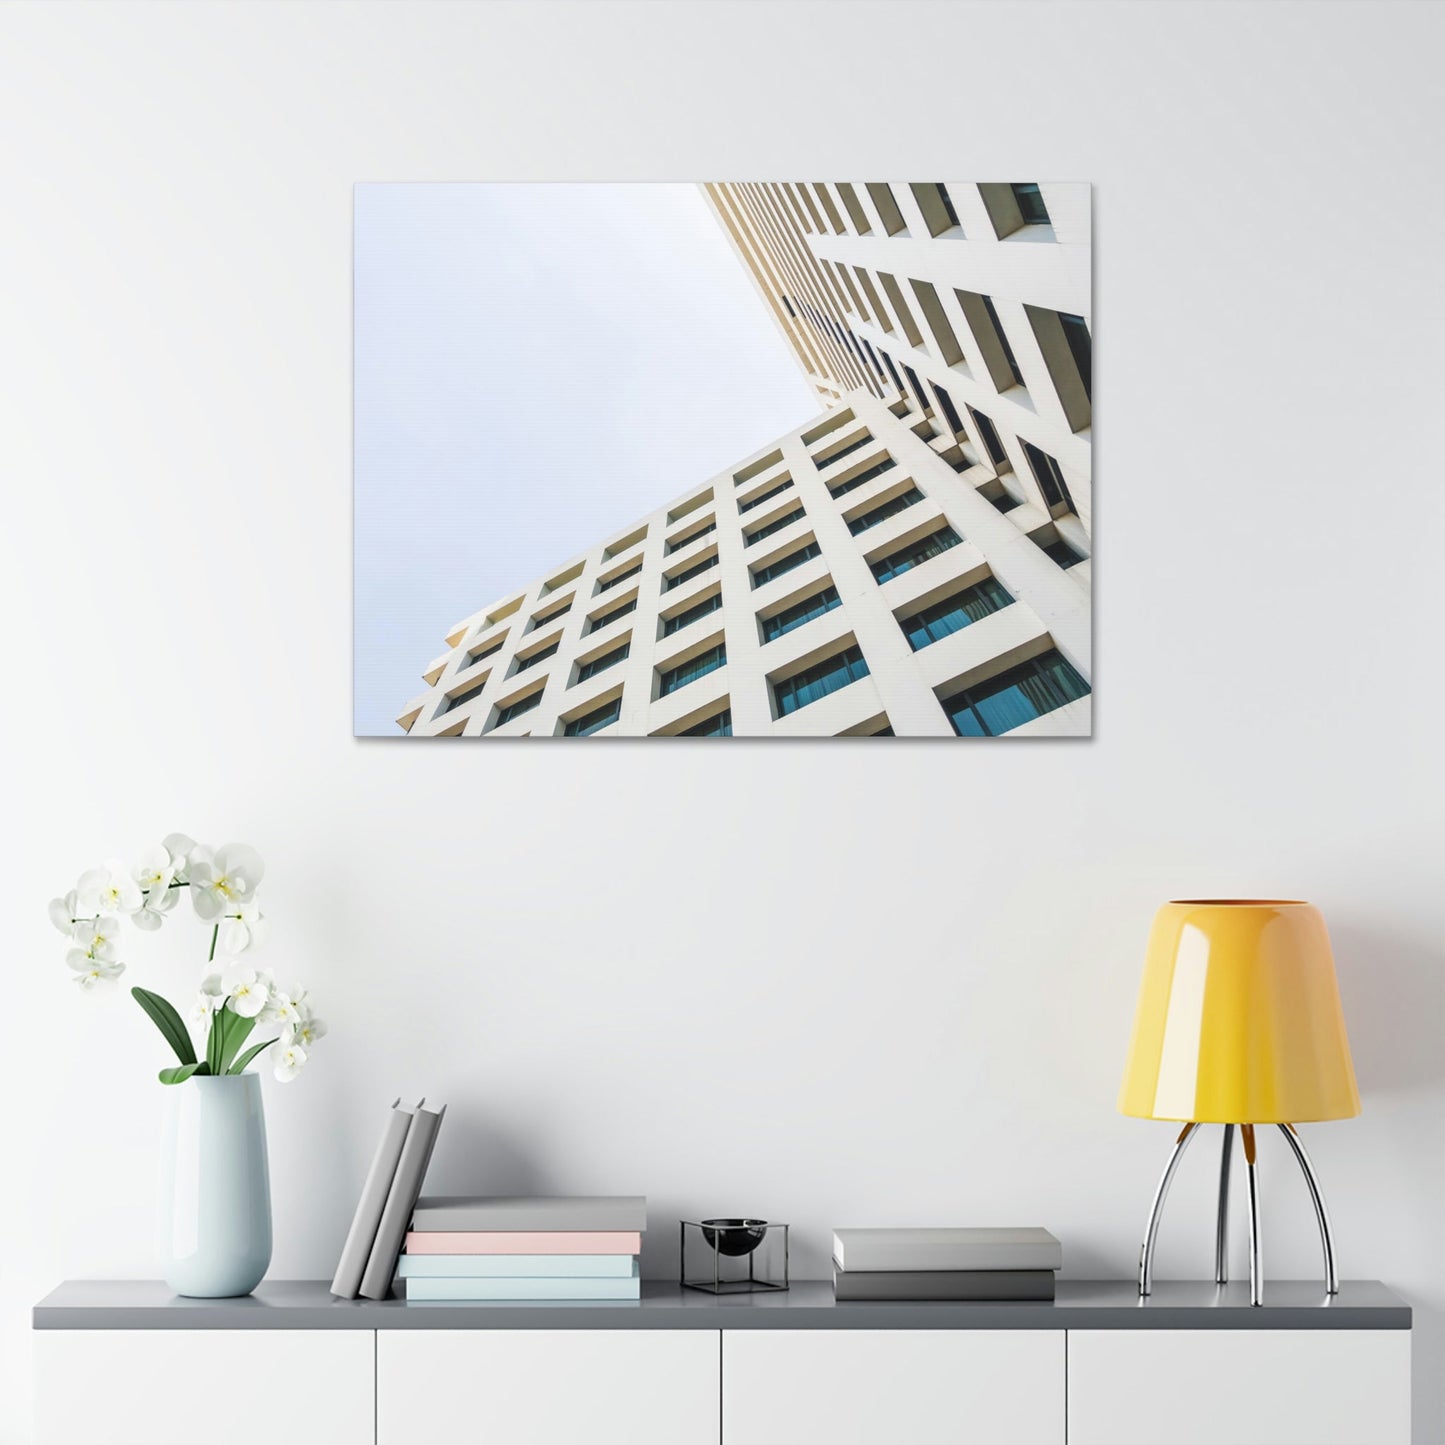 The Art of Architecture: Natural Canvas & Poster Print of Iconic Buildings